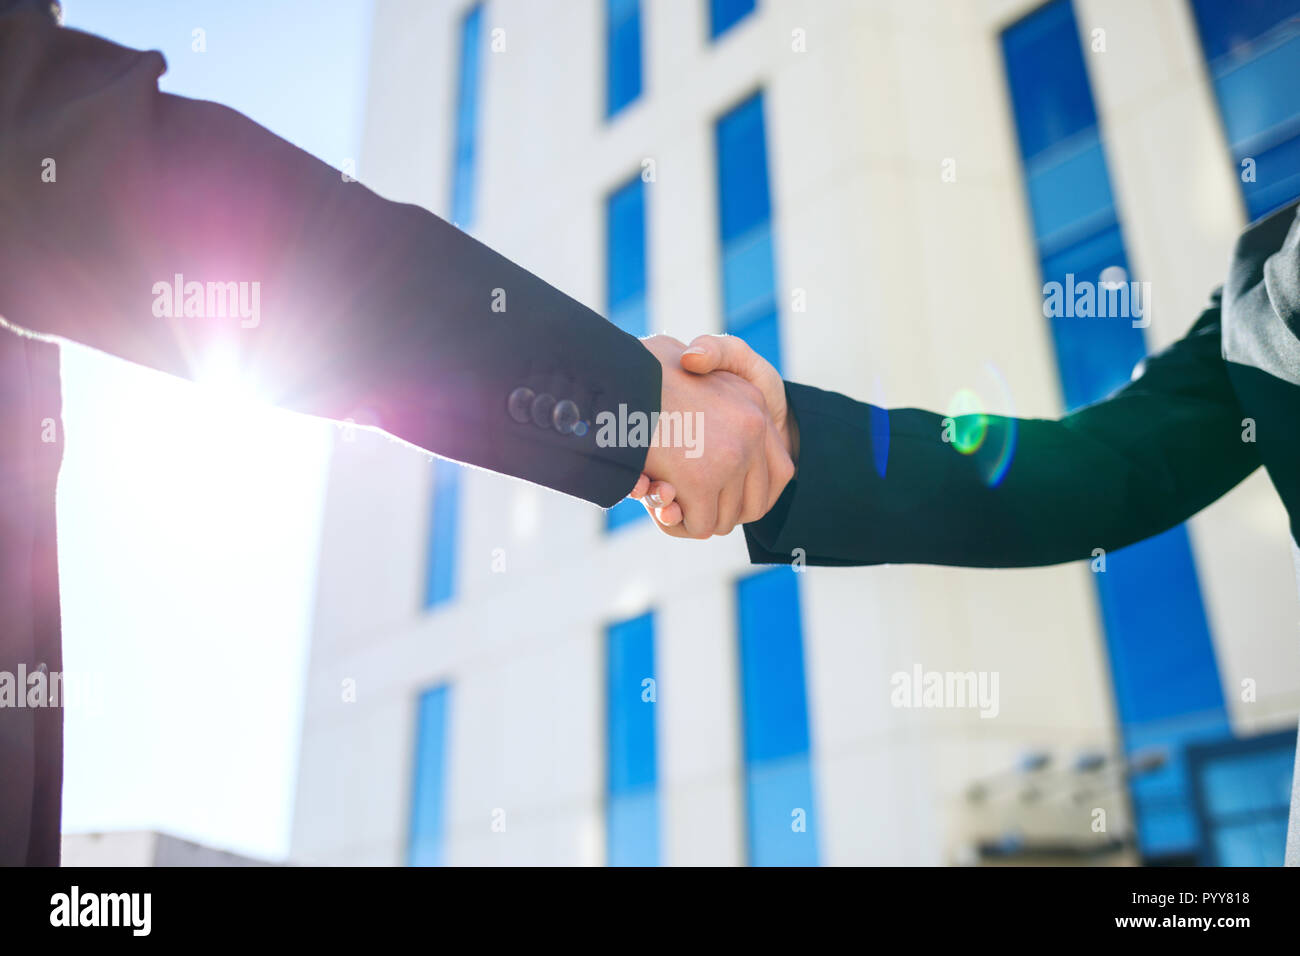 Handshake of business people over city buildings background. Stock Photo